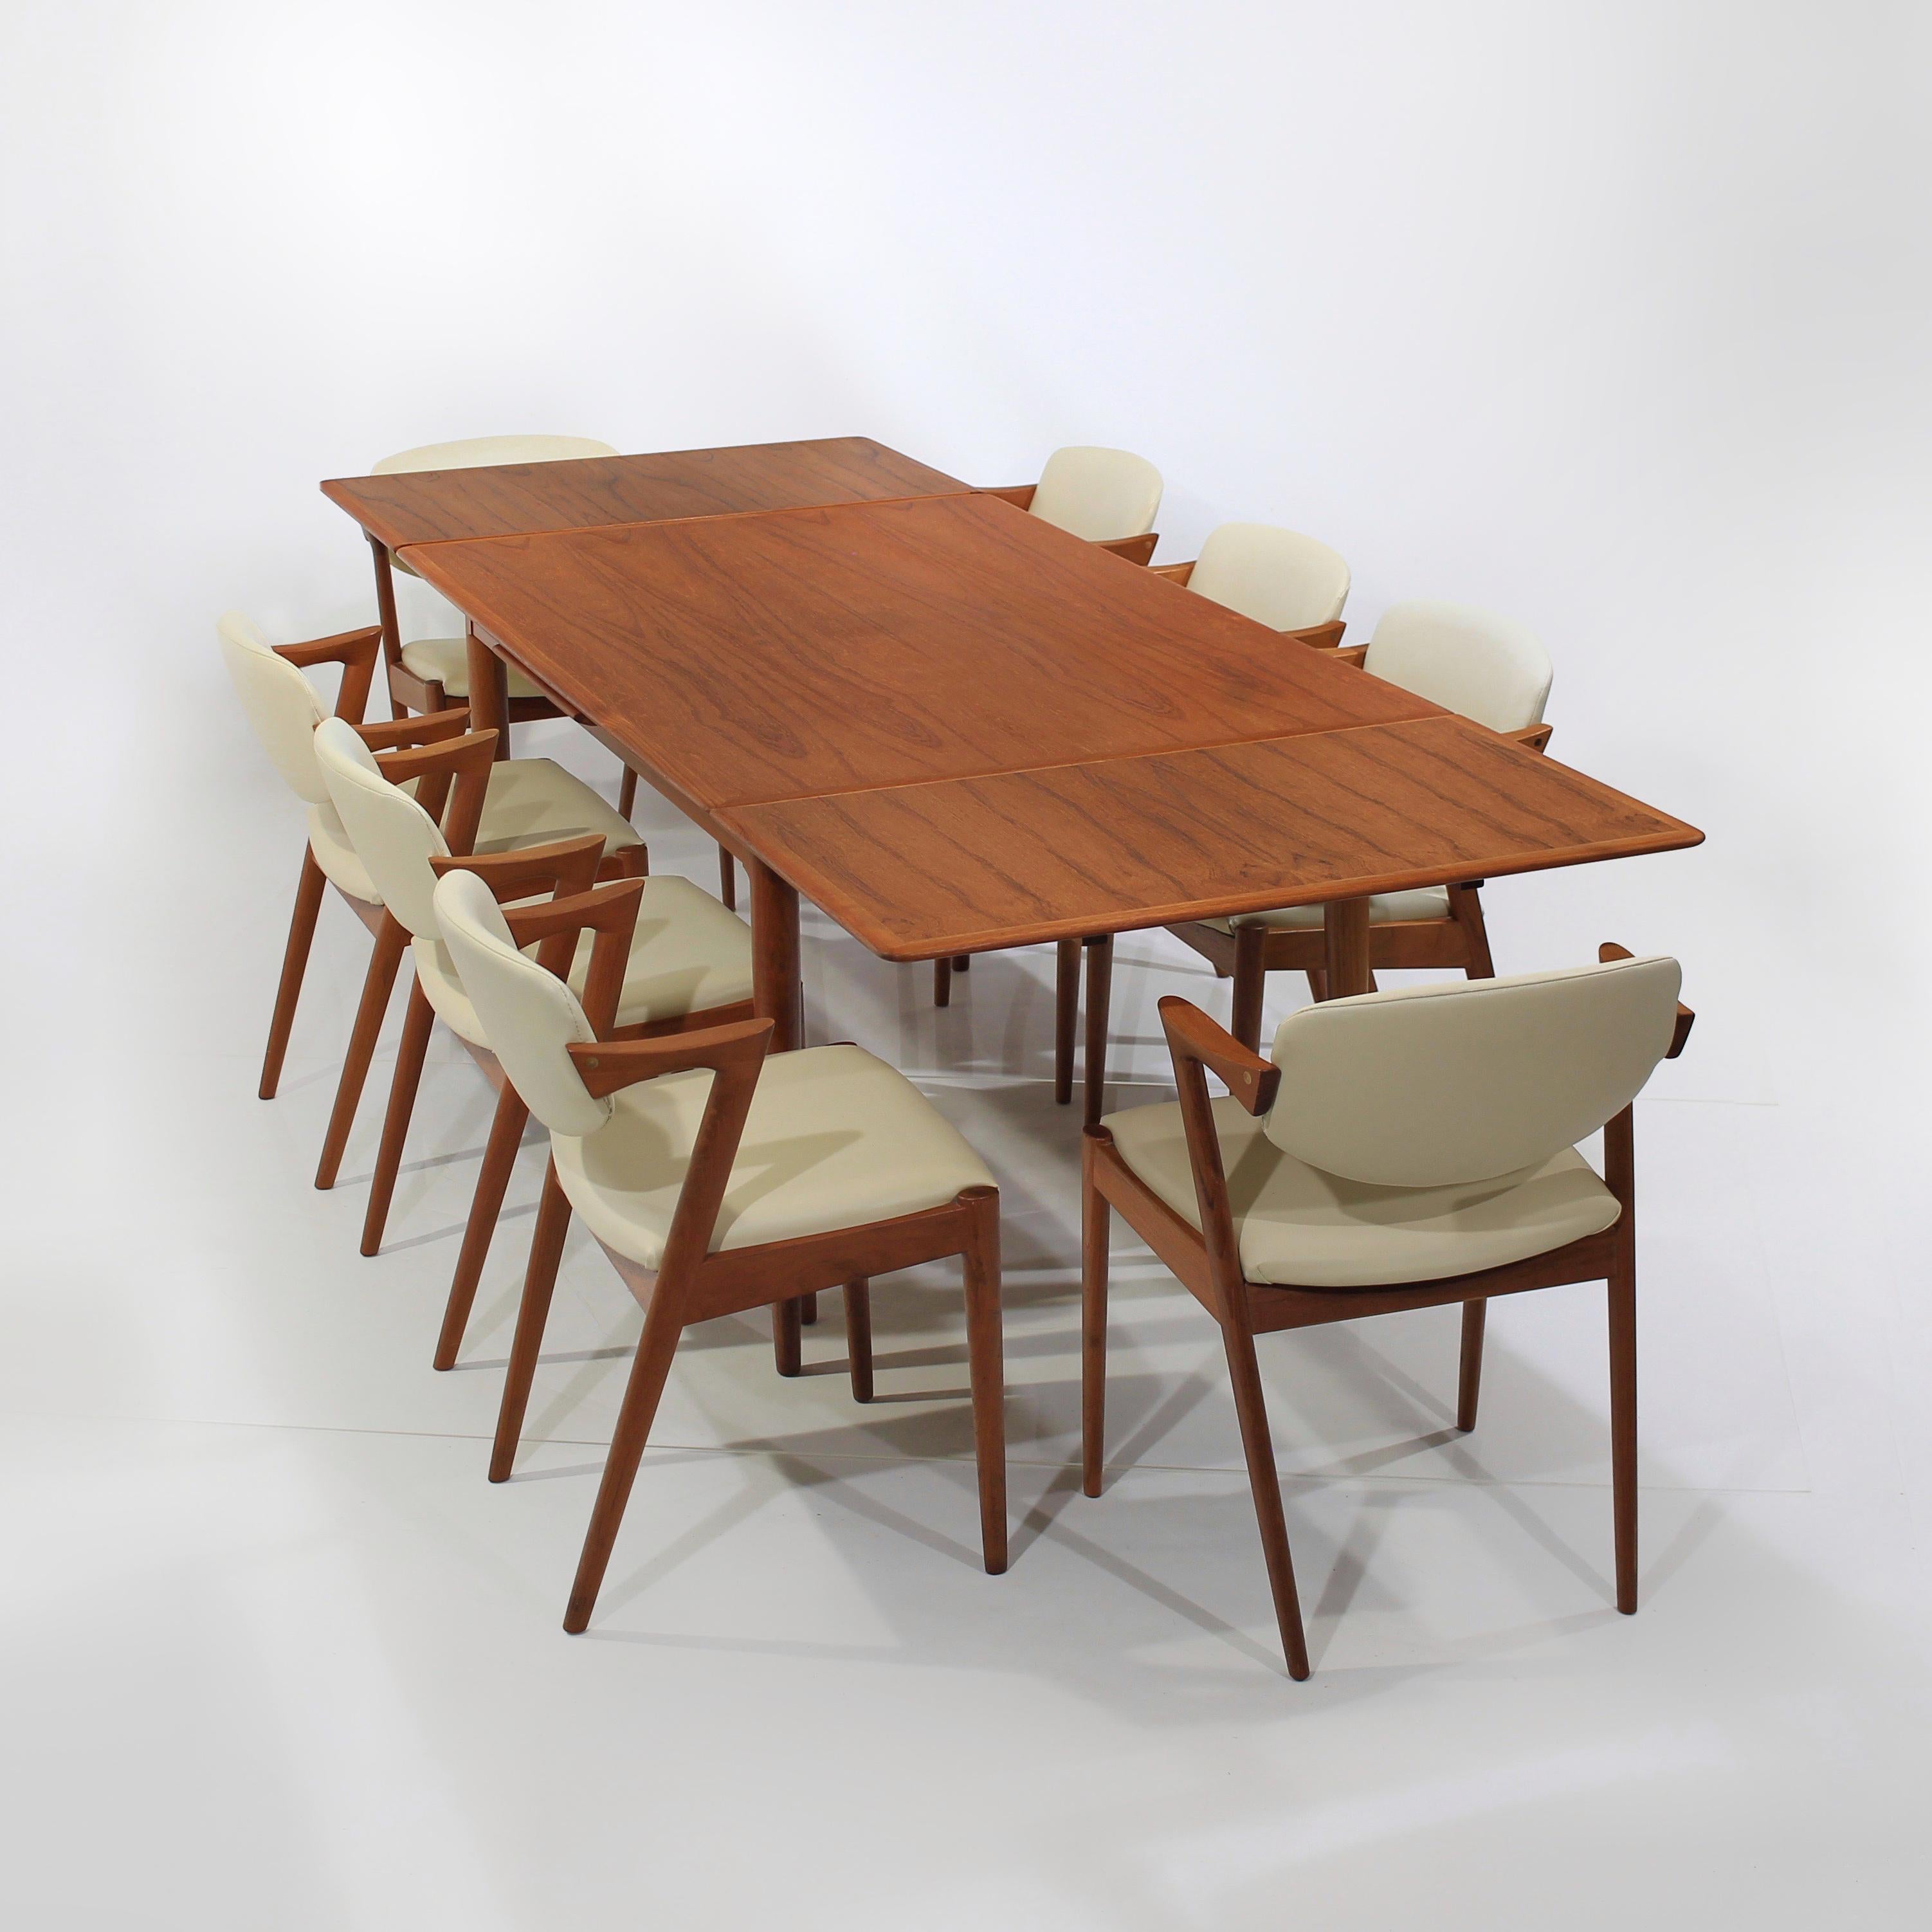 Presenting this beautiful dining set consisting of a Set of 8 Danish Modern Model 42 Teak Dining Chairs by Kai Kristiansen and Skovmand Andersen for Moreddi Dining Table with two leaves.

About the Table:

Rectangle Mid-Century Danish Modern